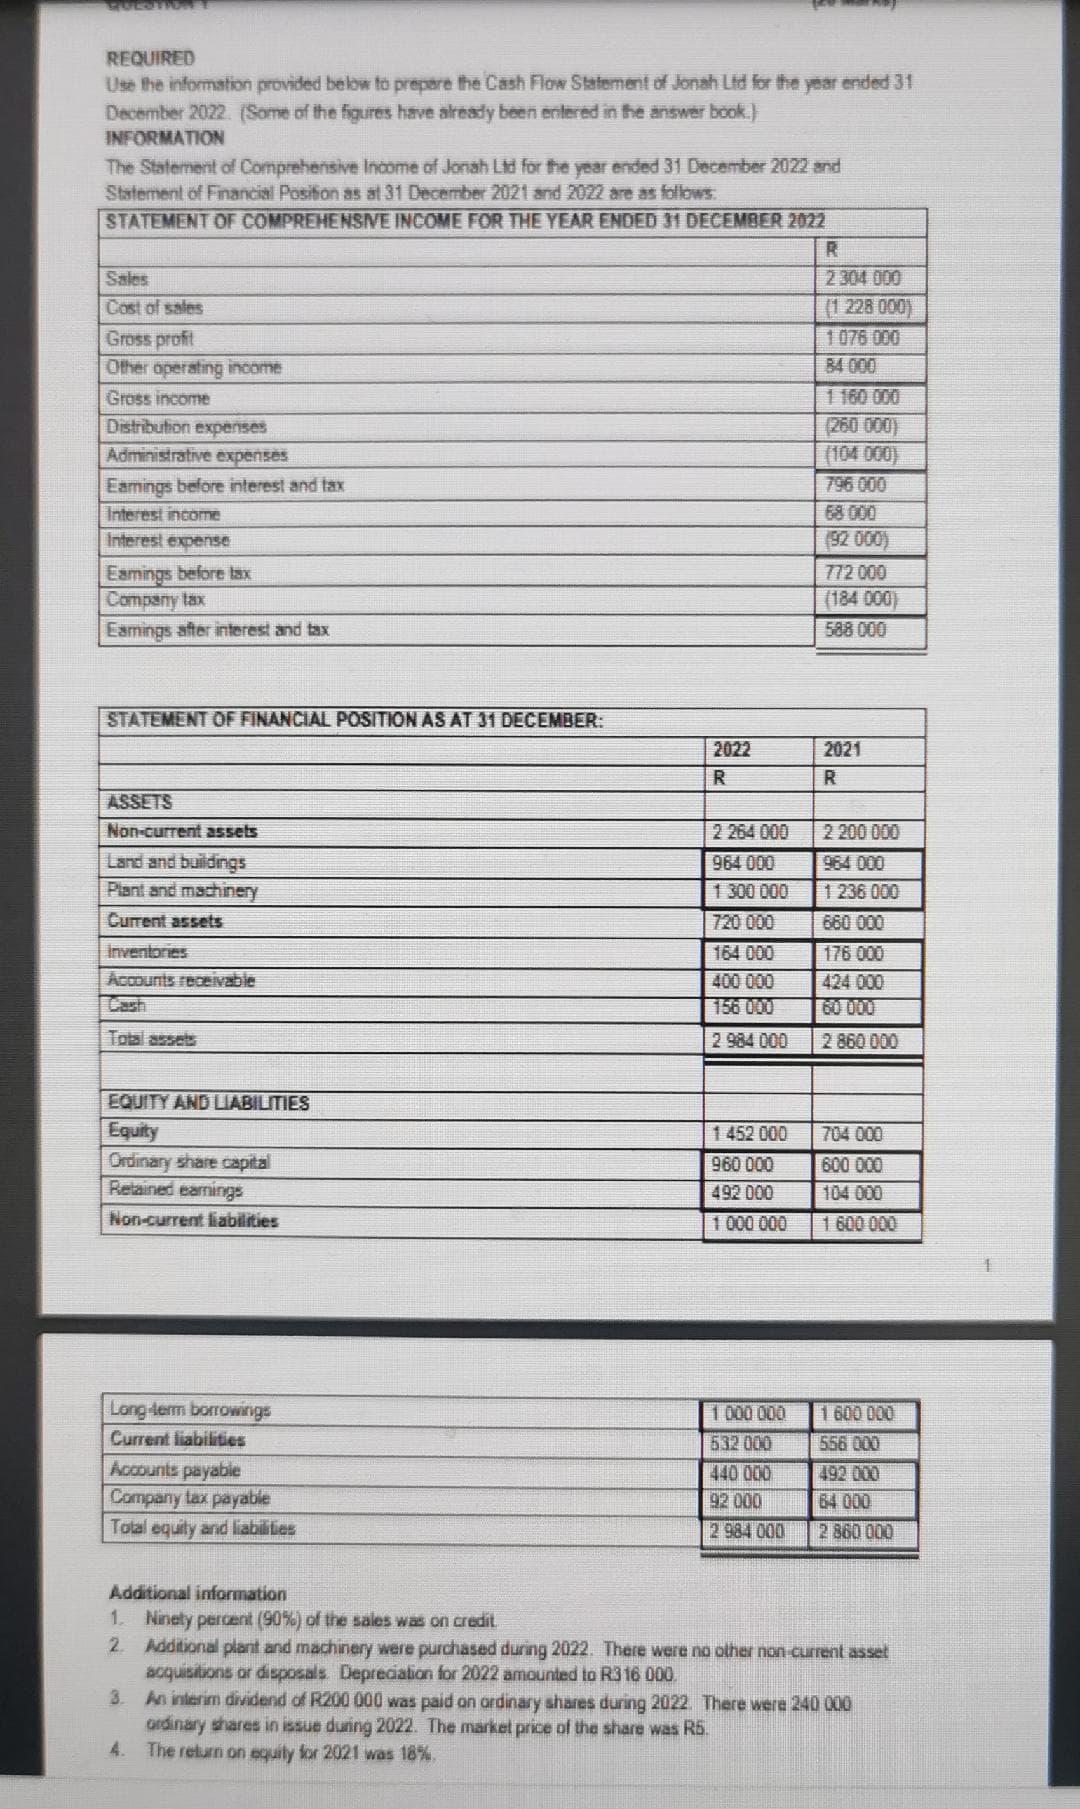 QUESTION
REQUIRED
Use the information provided below to prepare the Cash Flow Statement of Jonah Ltd for the year ended 31
December 2022. (Some of the figures have already been entered in the answer book.)
INFORMATION
The Statement of Comprehensive Income of Jonah Ltd for the year ended 31 December 2022 and
Statement of Financial Position as at 31 December 2021 and 2022 are as follows:
STATEMENT OF COMPREHENSIVE INCOME FOR THE YEAR ENDED 31 DECEMBER 2022
Sales
Cost of sales
Gross profit
Other operating income
Gross income
Distribution expenses
Administrative expenses
Earnings before interest and tax
Interest income
Interest expense
Esmings before tax
Company tax
Earnings after interest and tax
STATEMENT OF FINANCIAL POSITION AS AT 31 DECEMBER:
ASSETS
Non-current assets
Land and buildings
Plant and machinery
Current assets
Inventories
Accounts receivable
Total assets
EQUITY AND LIABILITIES
Equity
Ordinary share capital
Retained earnings
Non-current liabilities
Long-term borrowings
Current liabilities
Accounts payable
Company tax payable
Total equity and liabilities
2022
R
3.
2 264 000
964 000
1 300 000
720 000
164 000
400 000
156 000
2 984 000
1 452 000
960 000
492 000
1 000 000
1 000 000
532 000
440 000
92 000
2 984 000
R
2 304 000
(1 228 000)
1076 000
84 000
1160 000
(260 000)
(104 000)
796 000
68 000
(92 000)
772 000
(184 000)
588 000
2021
R
2 200 000
964 000
1 236 000
660 000
176 000
424 000
2 860 000
704 000
600 000
104 000
1 600 000
1 600 000
556 000
492 000
64 000
2 860 000
Additional information
1. Ninety percent (90%) of the sales was on credit.
2. Additional plant and machinery were purchased during 2022. There were no other non-current asset
acquisitions or disposals. Depreciation for 2022 amounted to R3 16 000.
interim dividend of R200 000 was paid on ordinary shares during 2022. There were 240 000
ordinary shares in issue during 2022. The market price of the share was R5.
4. The return on equity for 2021 was 18%.